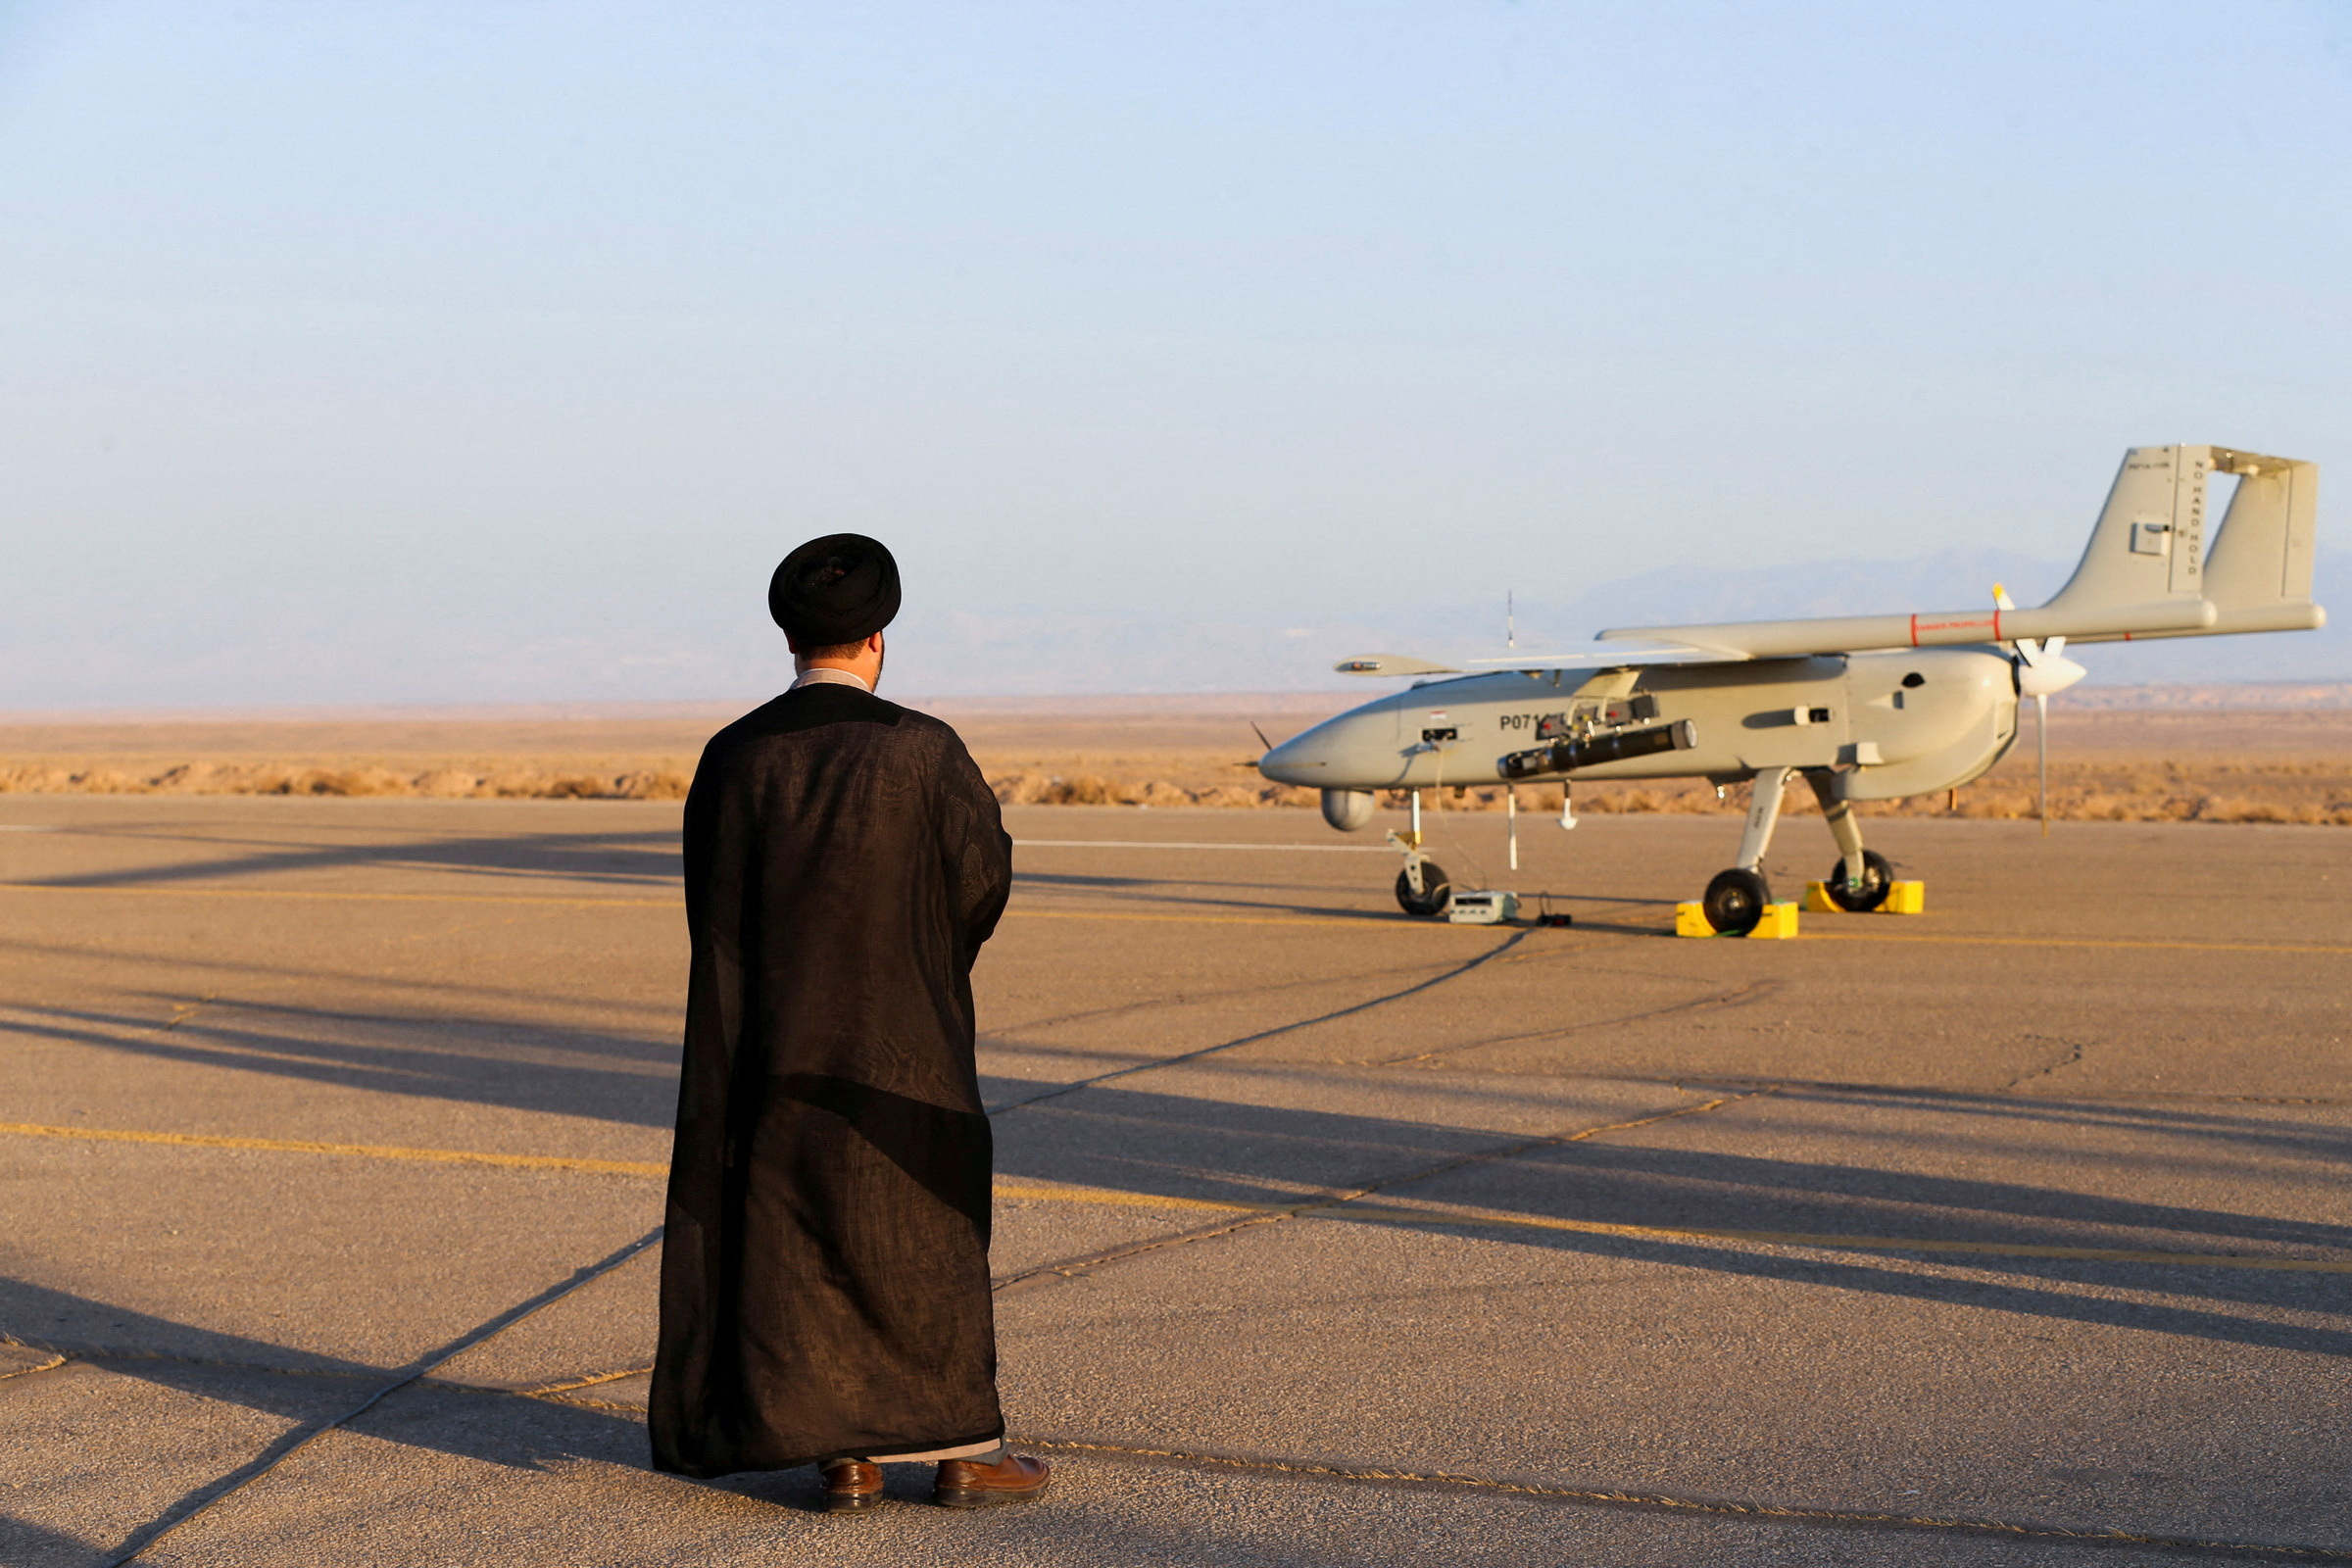 An Iranian cleric stands near a drone during a military exercise in an undisclosed location in Iran